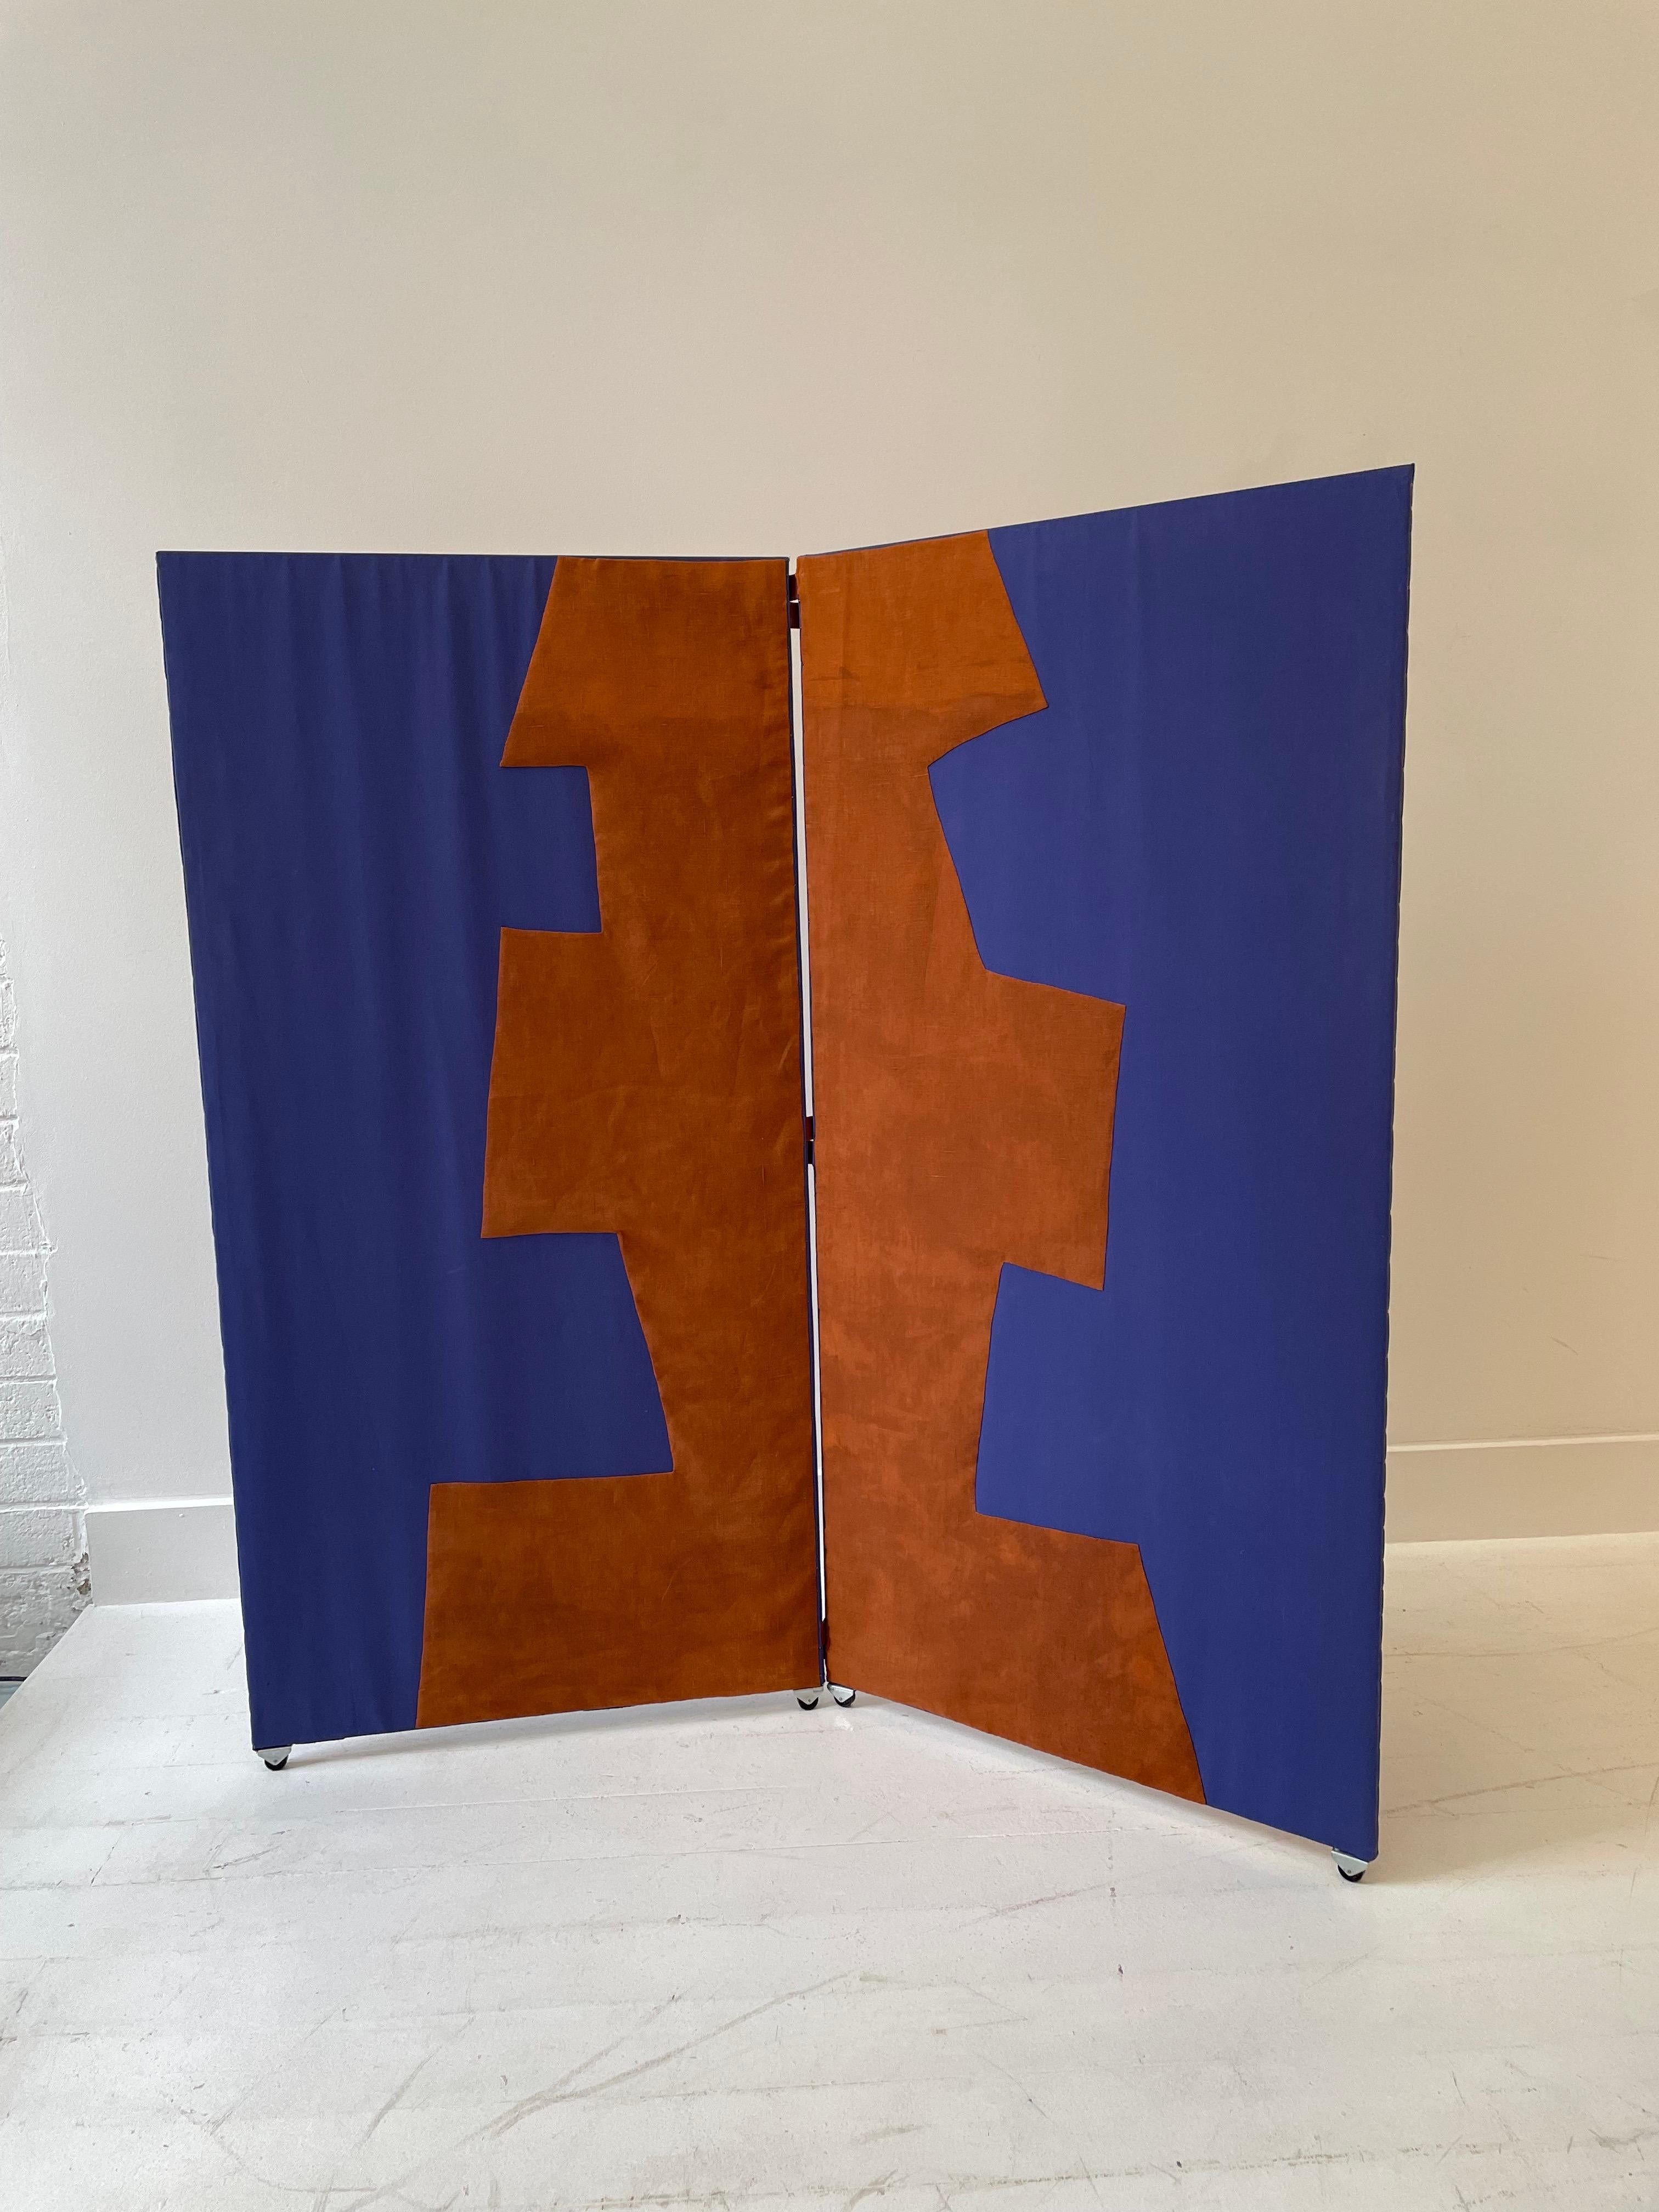 Height: 164cm
Width: 160cm  

Designer: Gertrud Olsson
Manufacturer: Gertrud Olsson
Date: 1990s. 
Signed: Signed and Dated 1992

Materials: Fabric

Description: Signed by the artist Gertrud Olsson

Minimal fading of fabric. Each panel sits on two